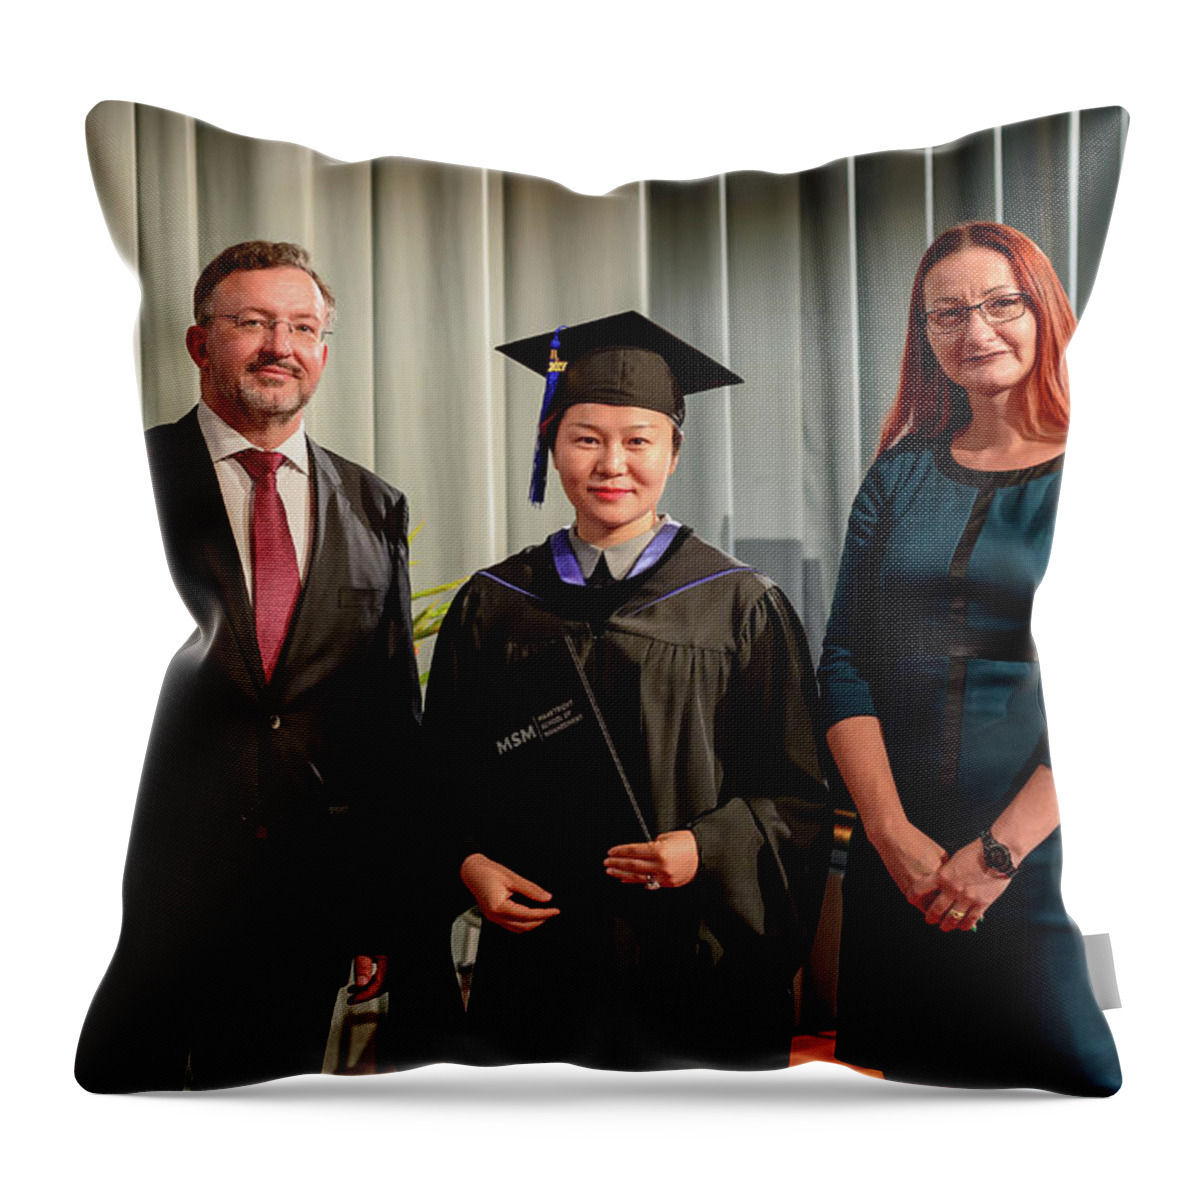  Throw Pillow featuring the photograph Graduation Ceremony 2017 #1 by Maastricht School Of Management